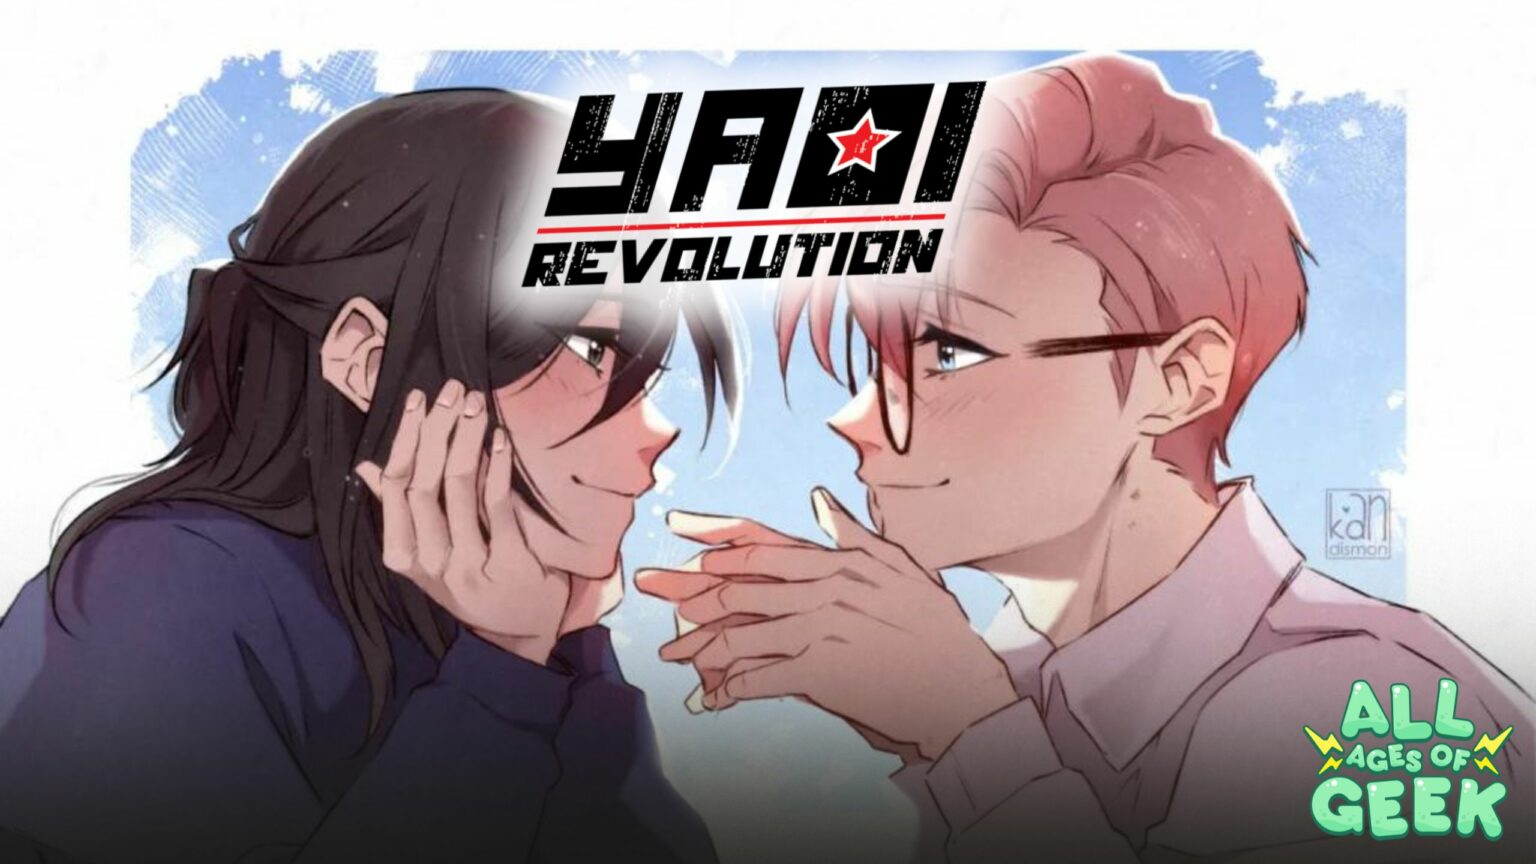 All Ages of Geek Yaoi Revolution